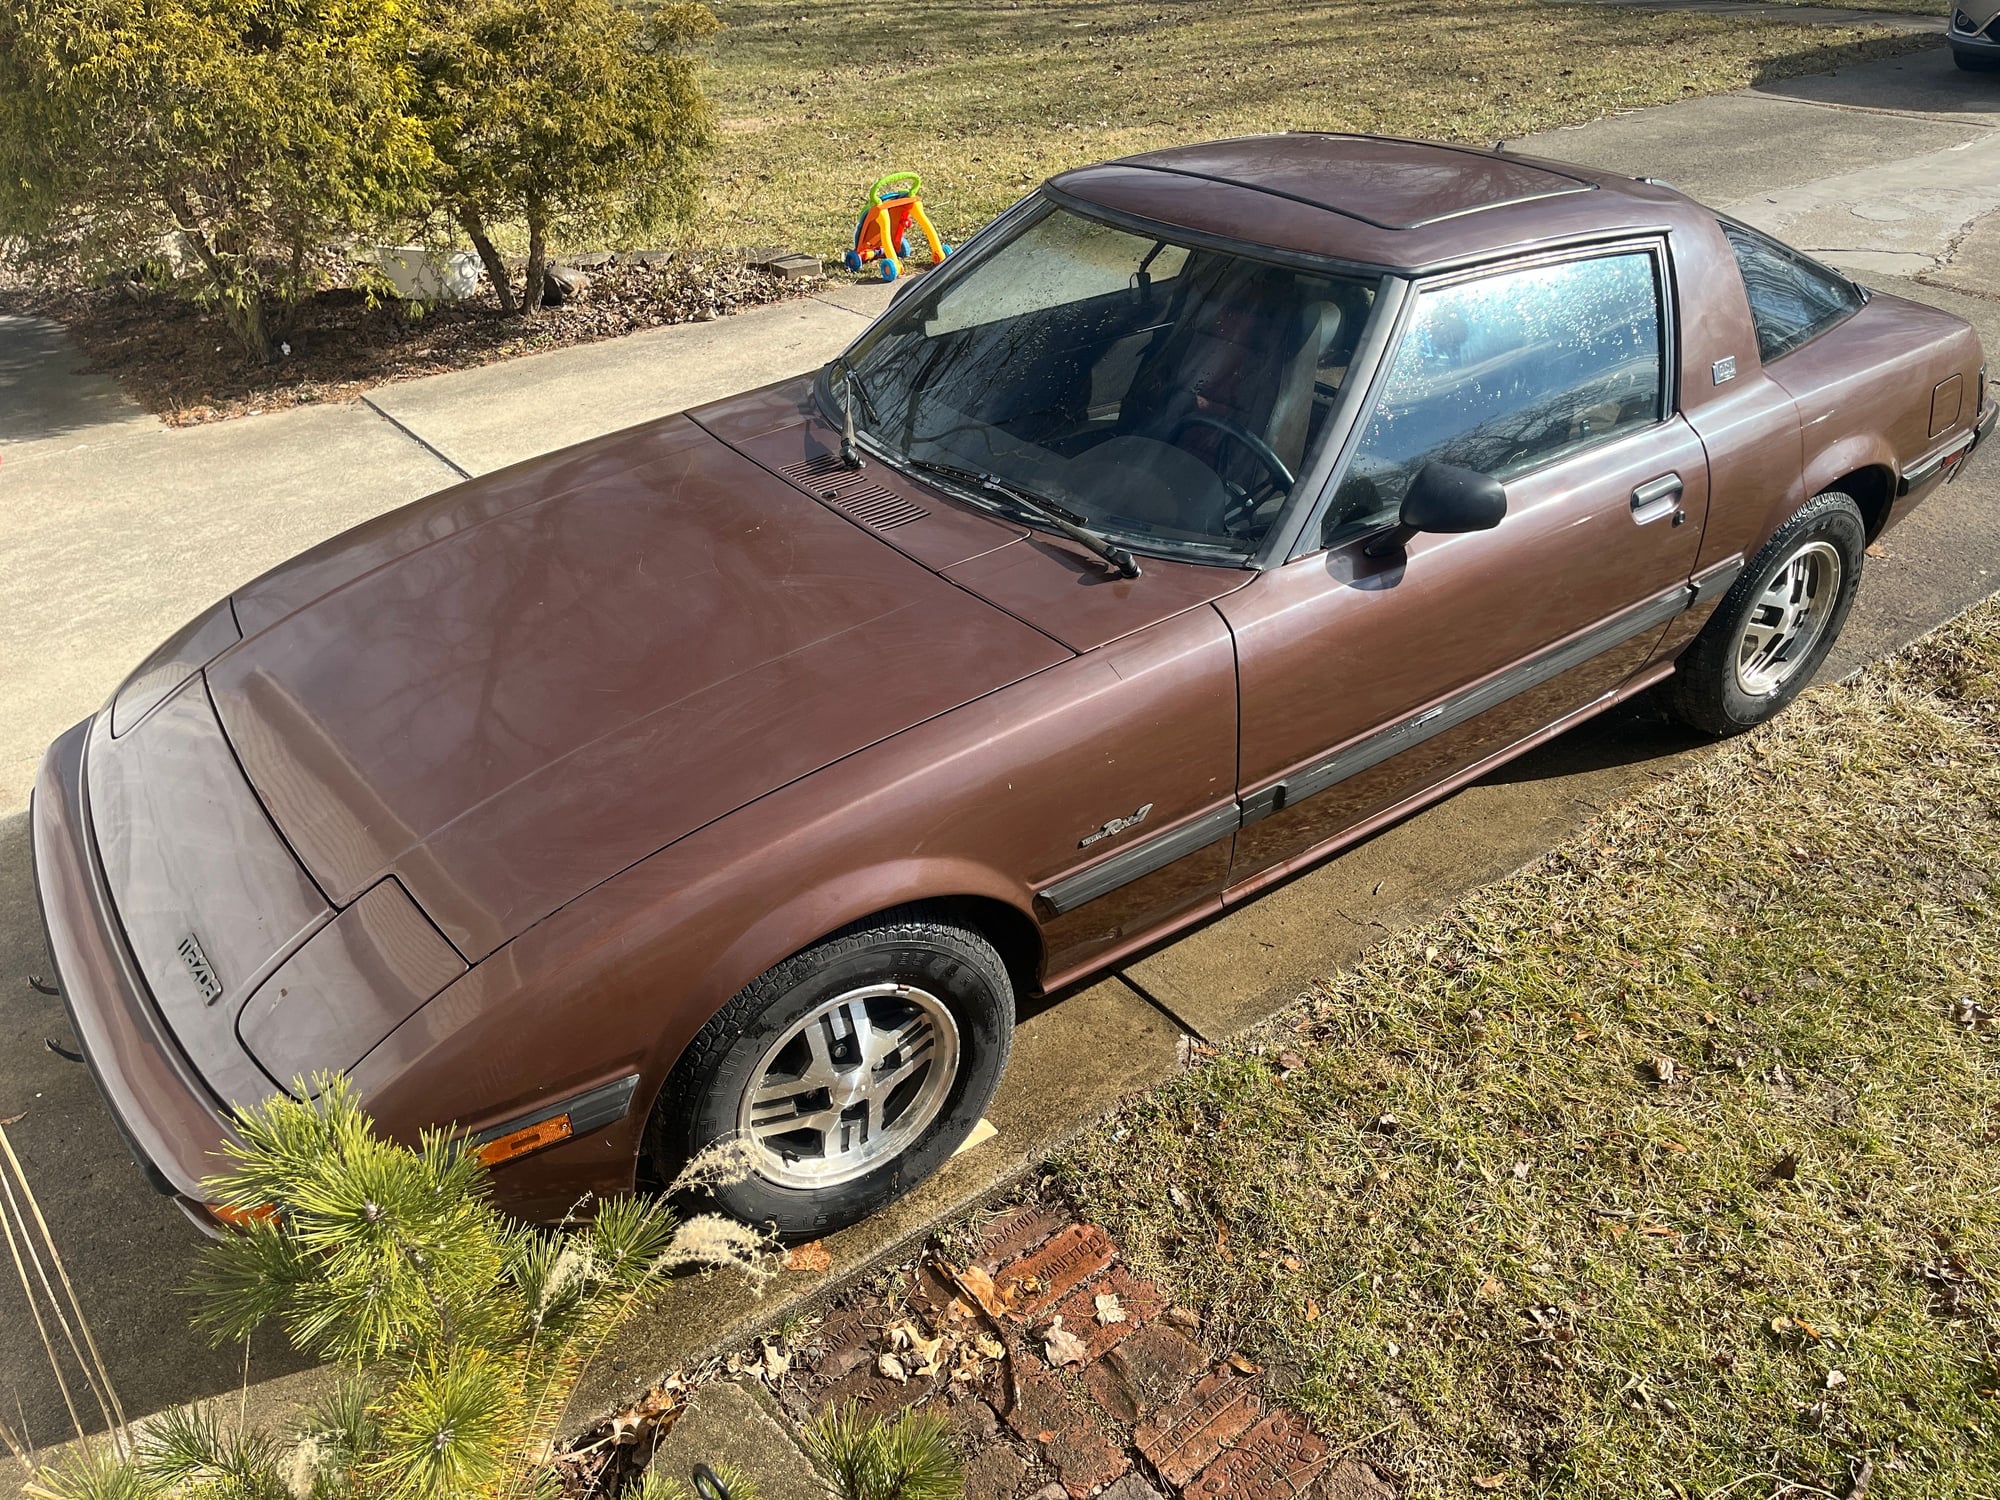 1983 Mazda RX-7 - 83 rx-7 gsl - Used - VIN Jm1fb3319d0743028 - 95,075 Miles - Other - 2WD - Manual - Coupe - Brown - North Olmsted, OH 44070, United States